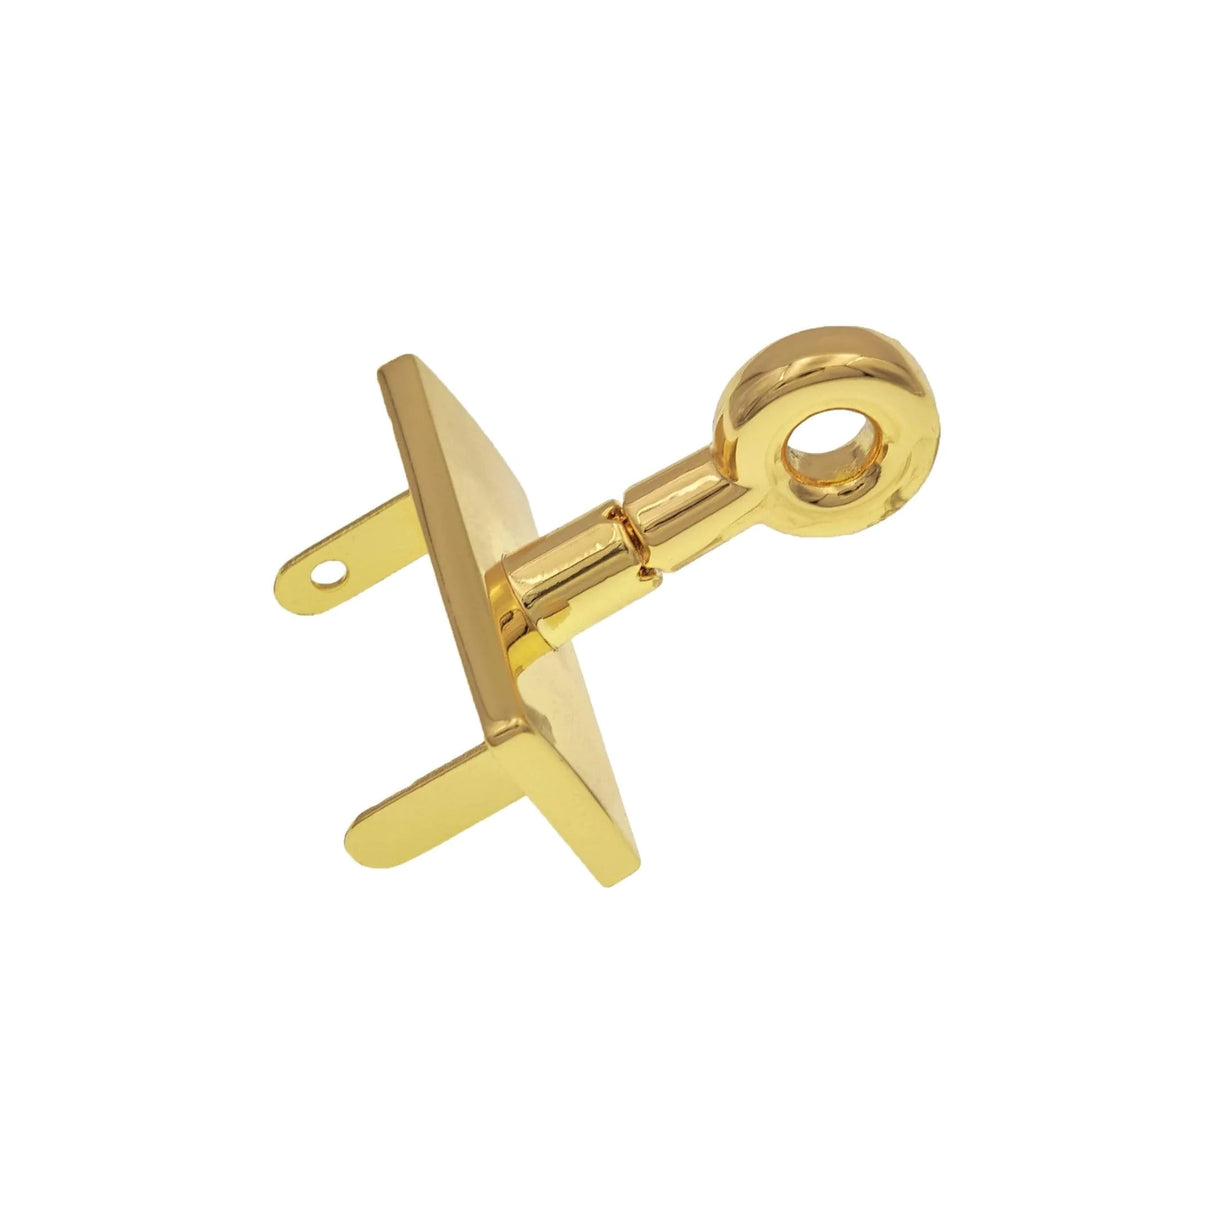 1 7/8 Shiny Gold, Double Plate Turn Lock, Zinc Alloy, #P-2277-GOLD